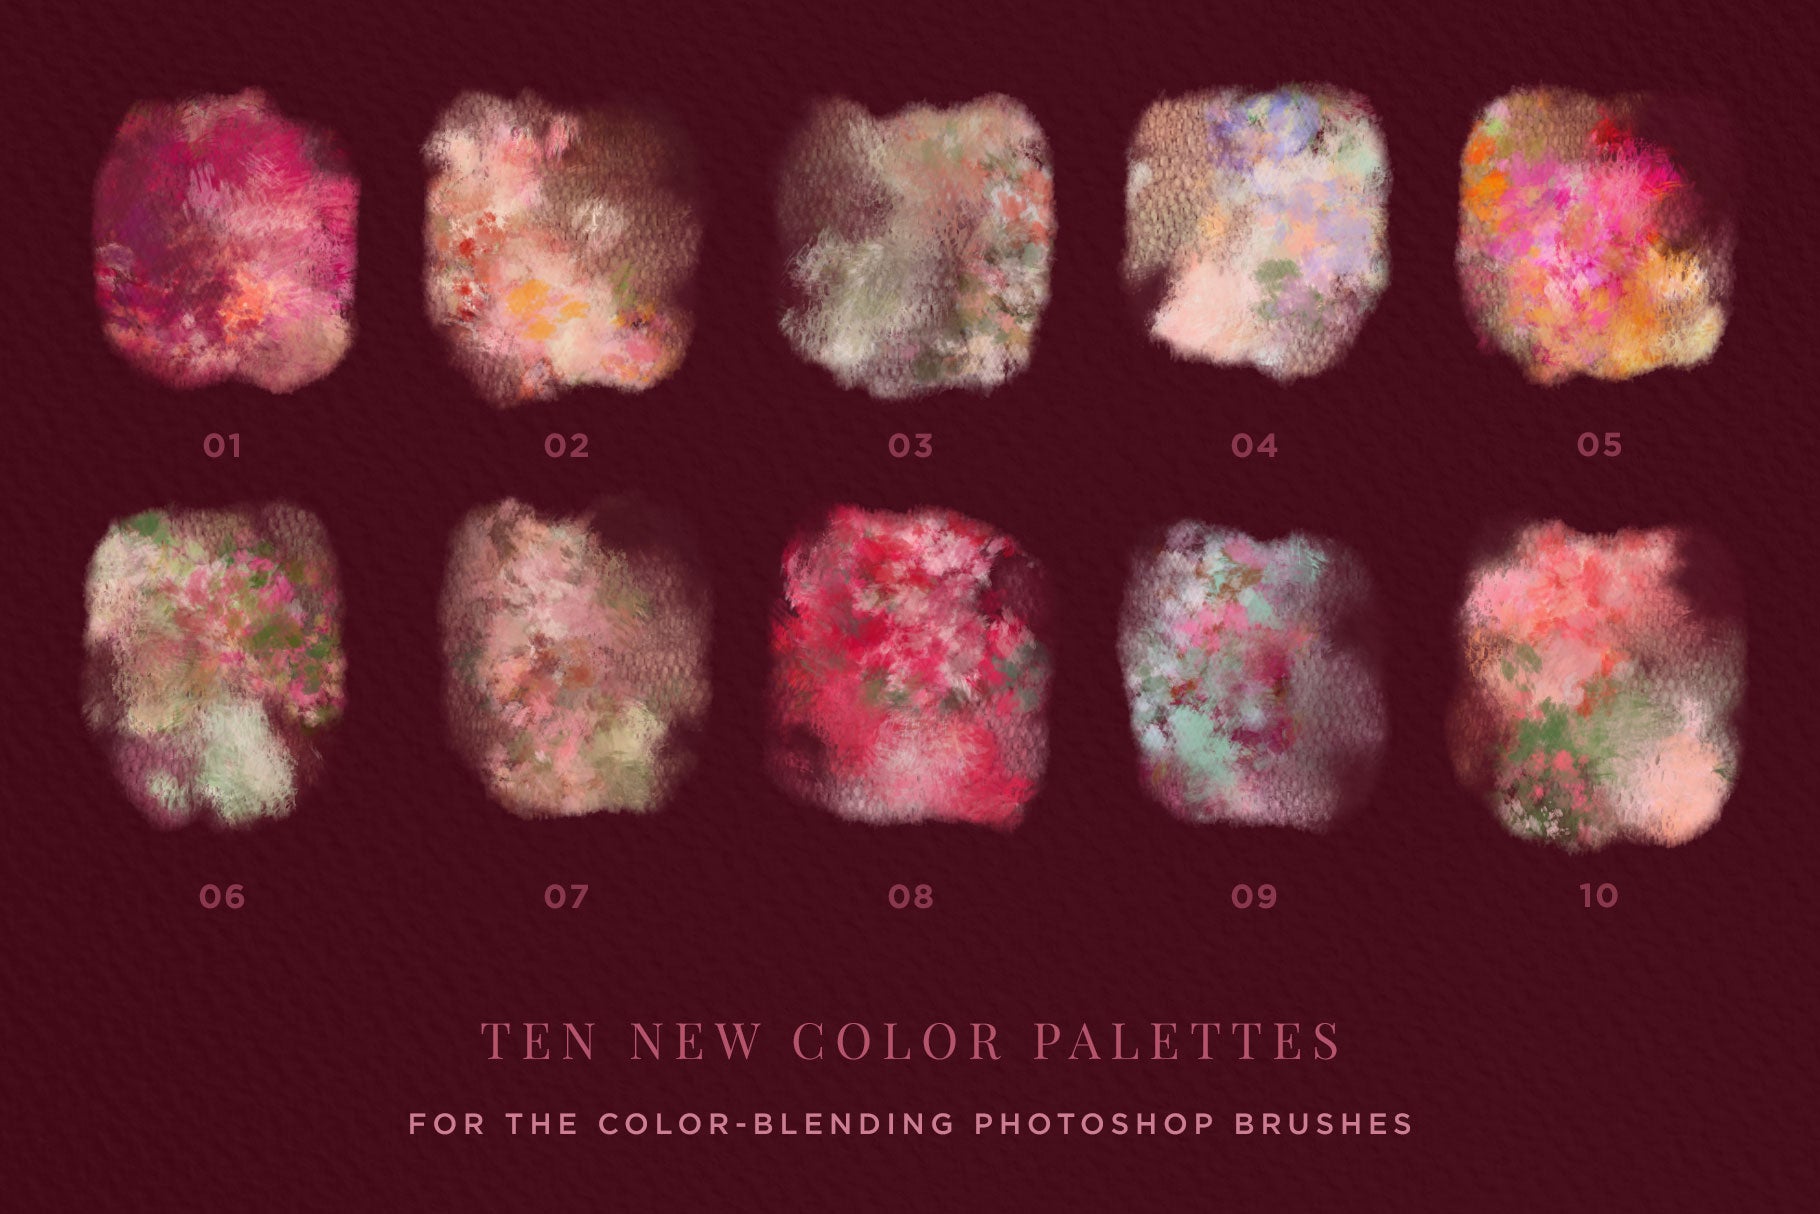 floral and lace wedding and feminine brushes for photoshop floral color palette